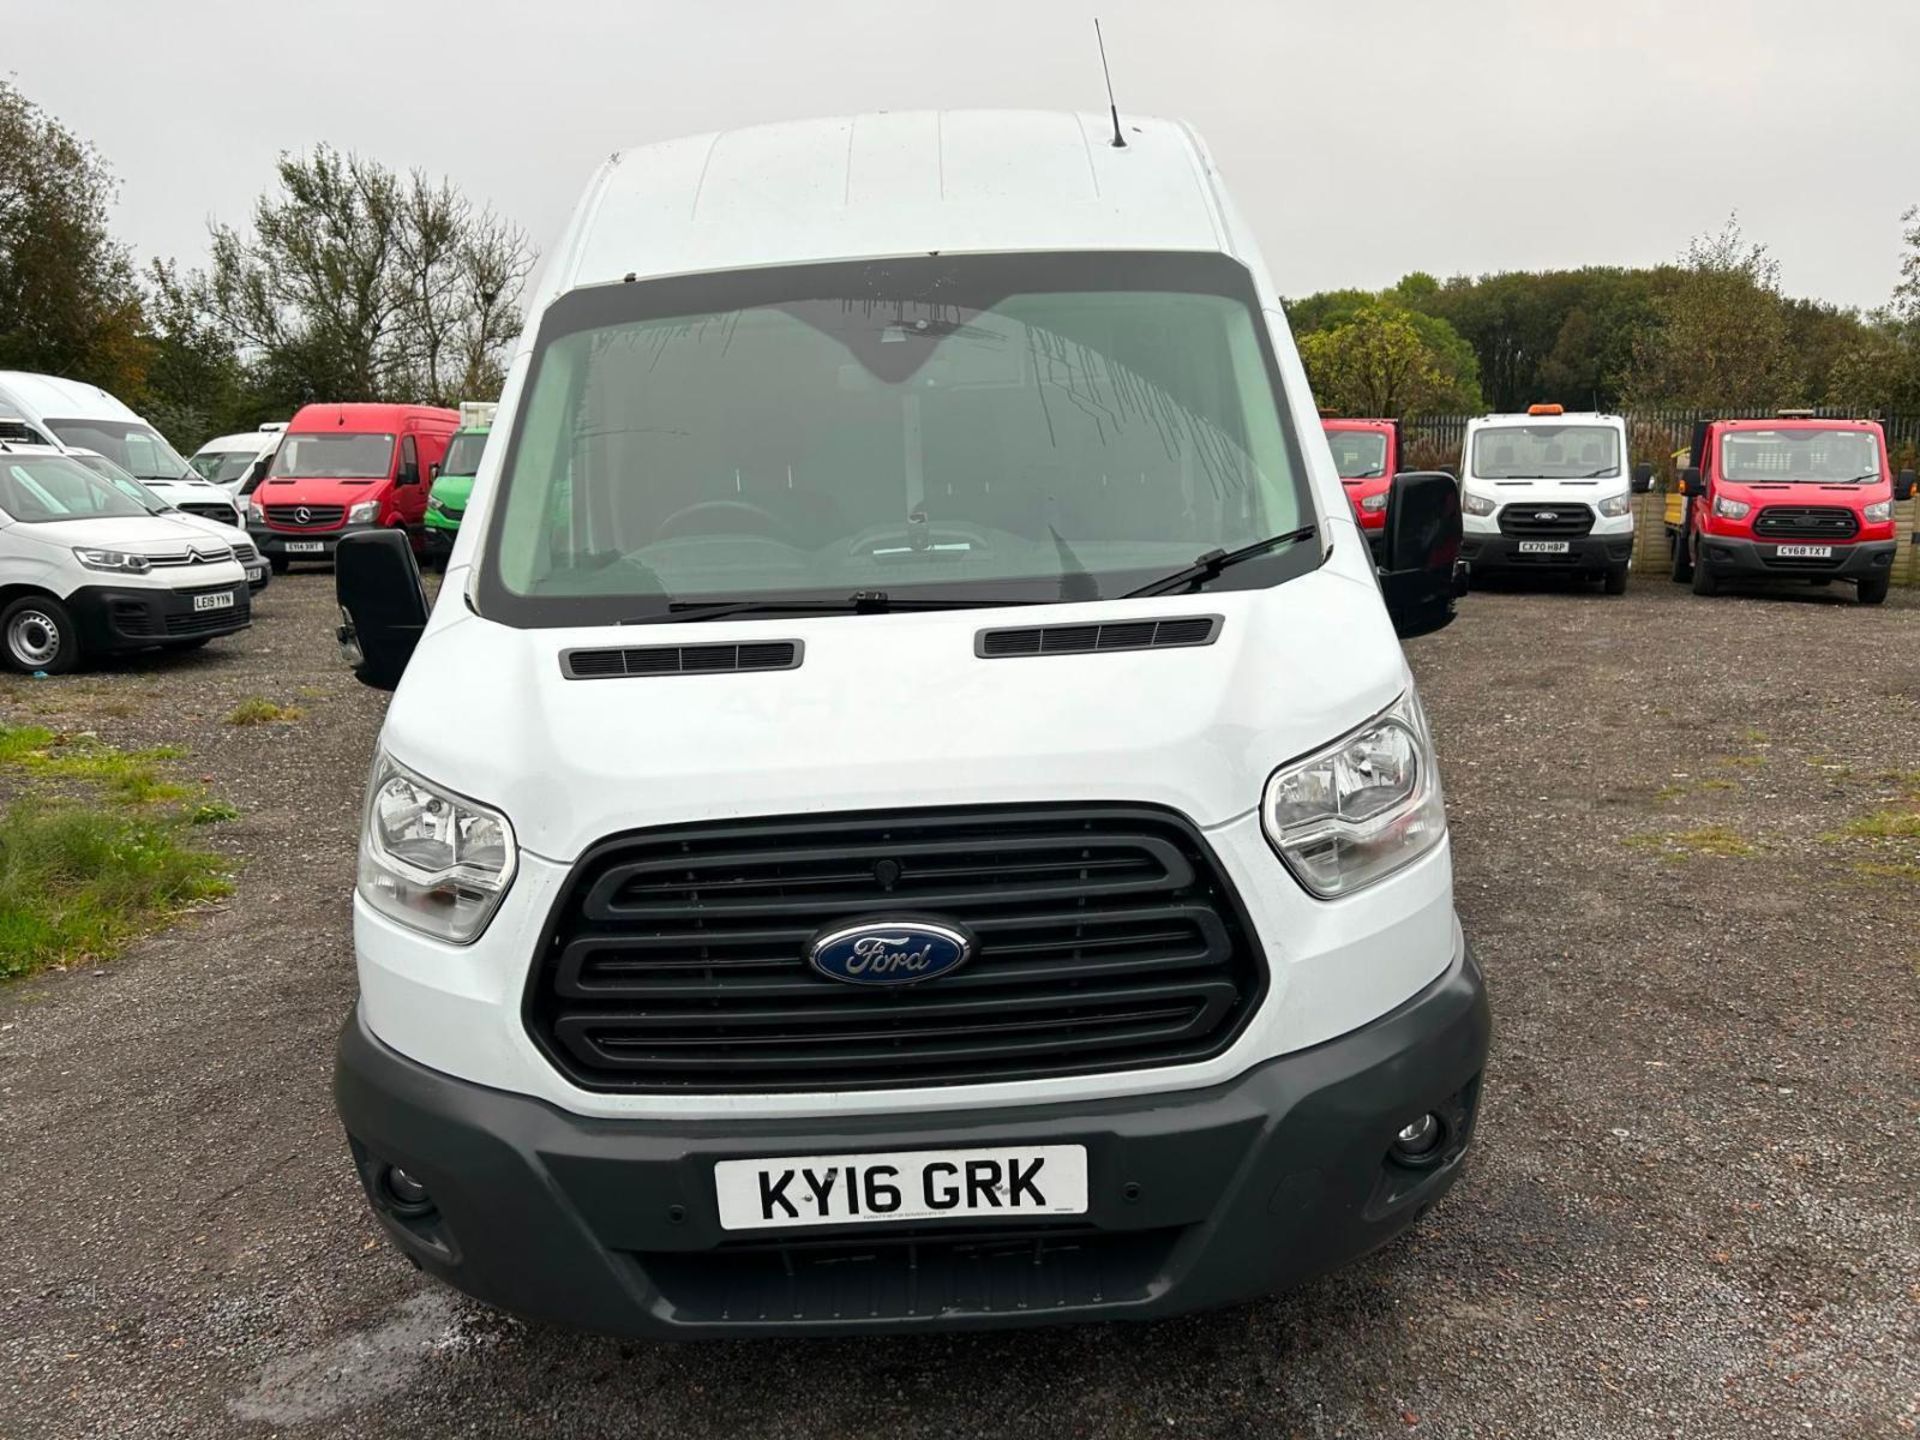 RELIABLE WORKHORSE: 2016 FORD TRANSIT 2.2 TDCI L3 H3 PANEL VAN - Image 8 of 12